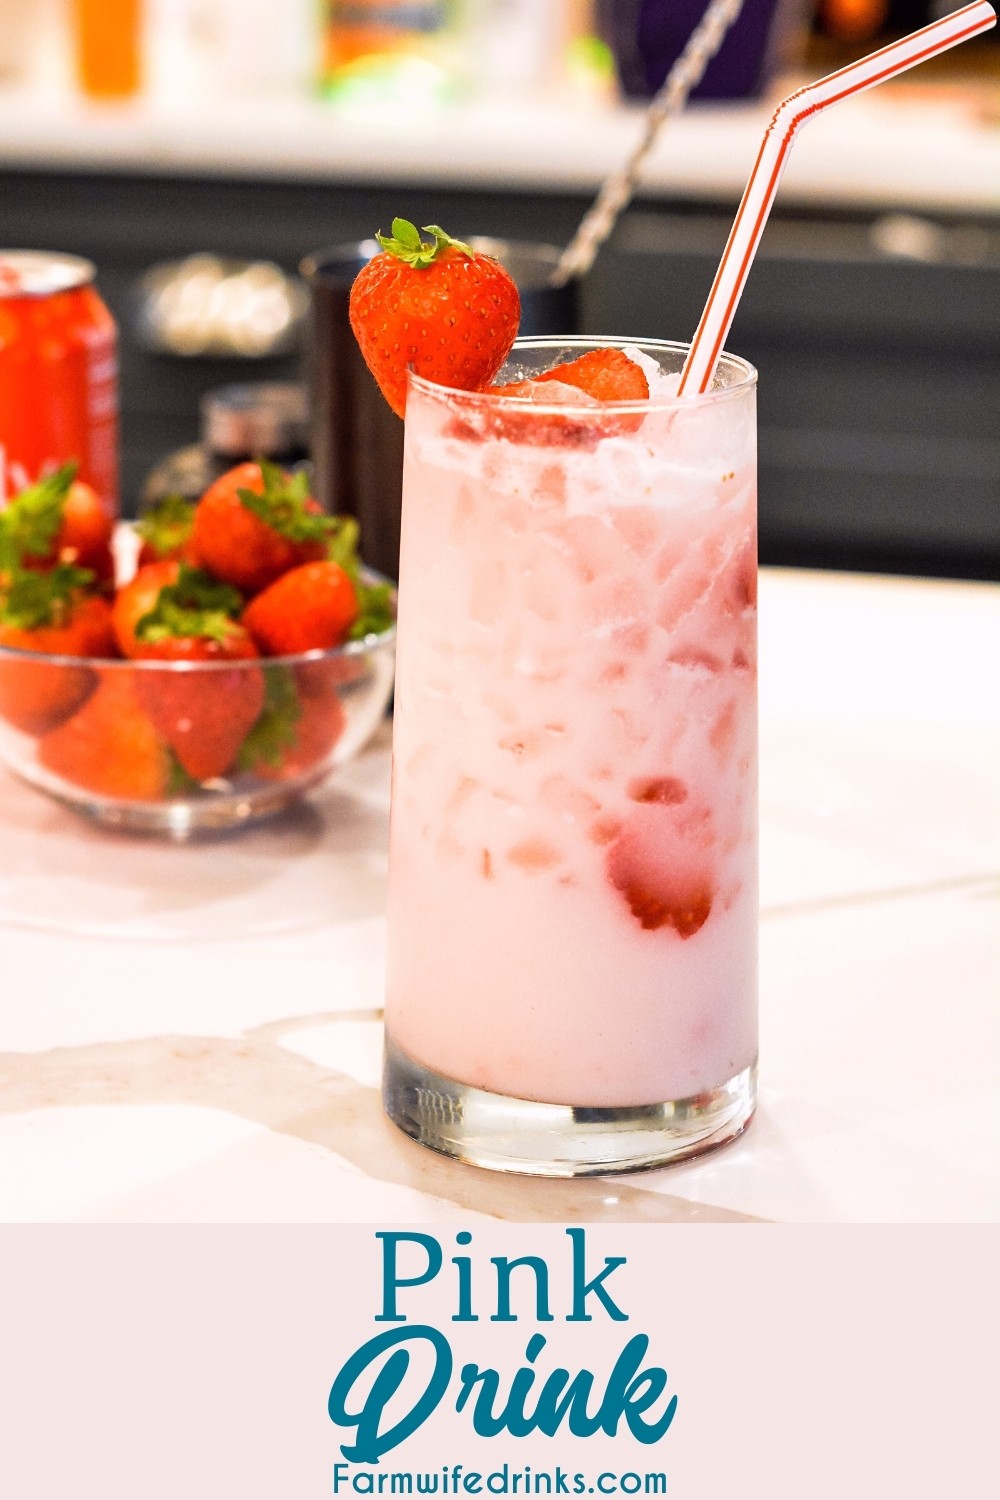 Copycat Starbucks pink drink is a simple combination of cream of coconut, freeze-dried strawberries, fresh strawberries, and sparkling strawberry water makes this drink simple yet refreshing to make.